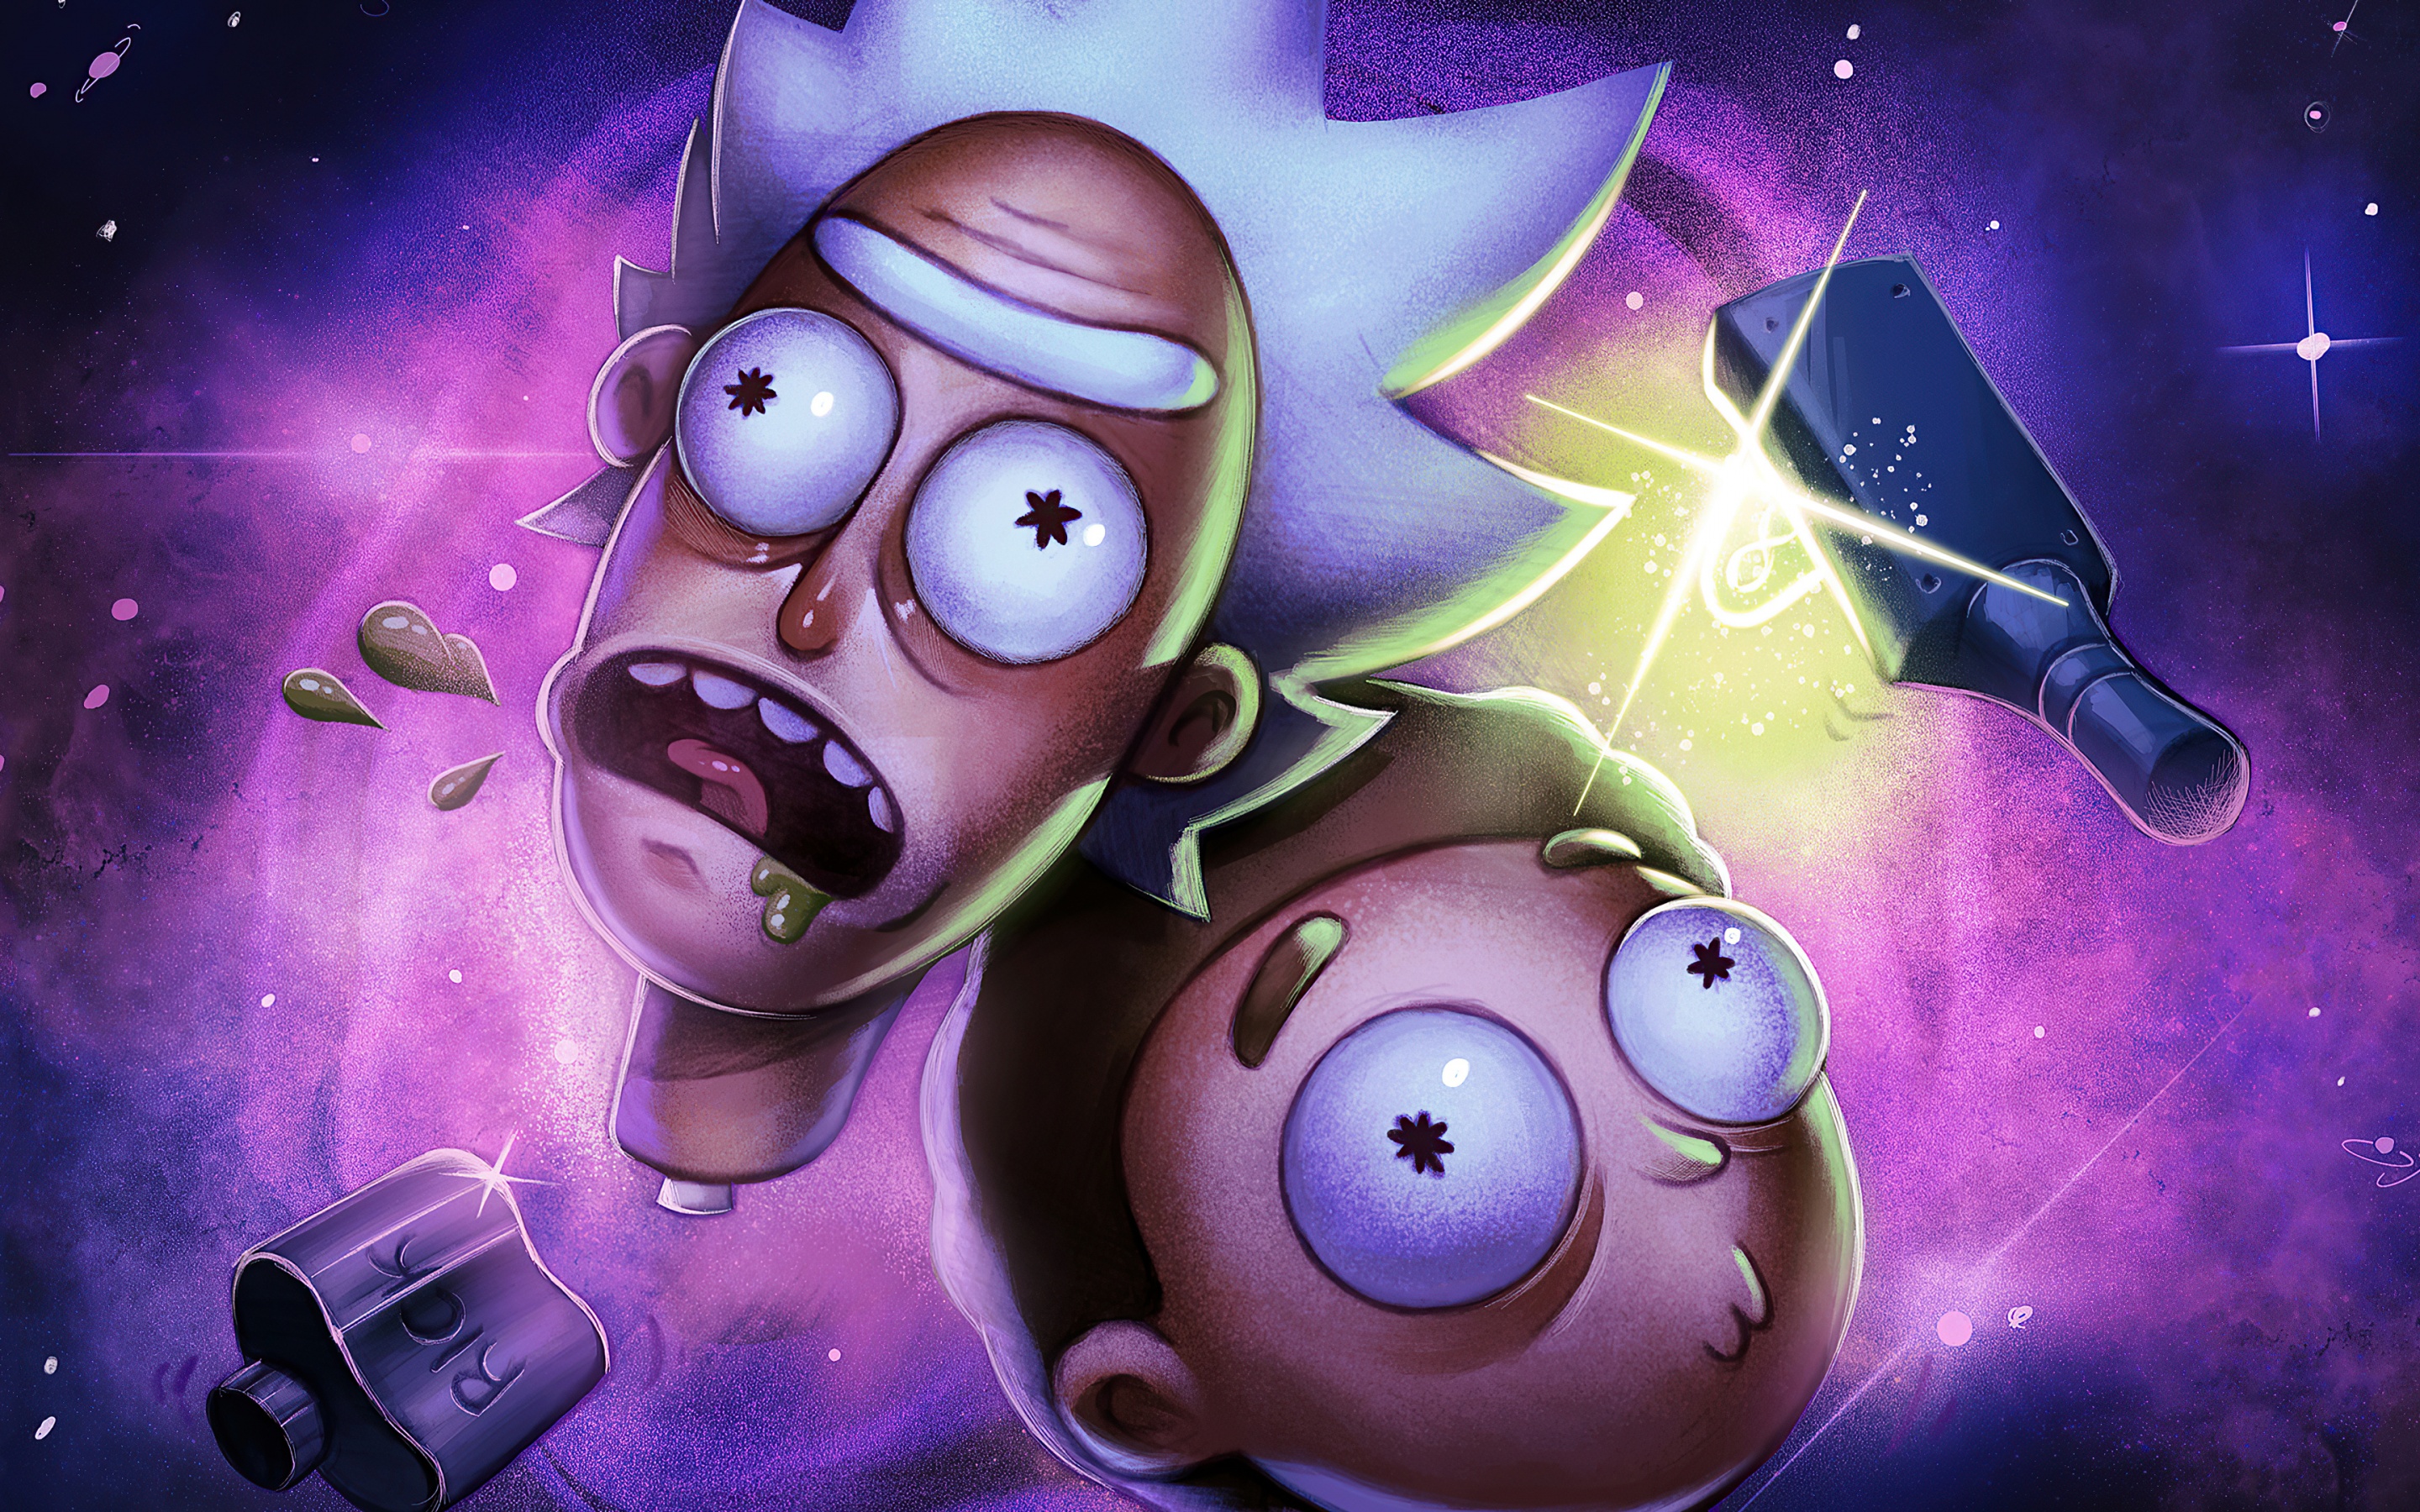 Rick and Morty Breaking Bad  High Quality Premium Poster Print  eBay